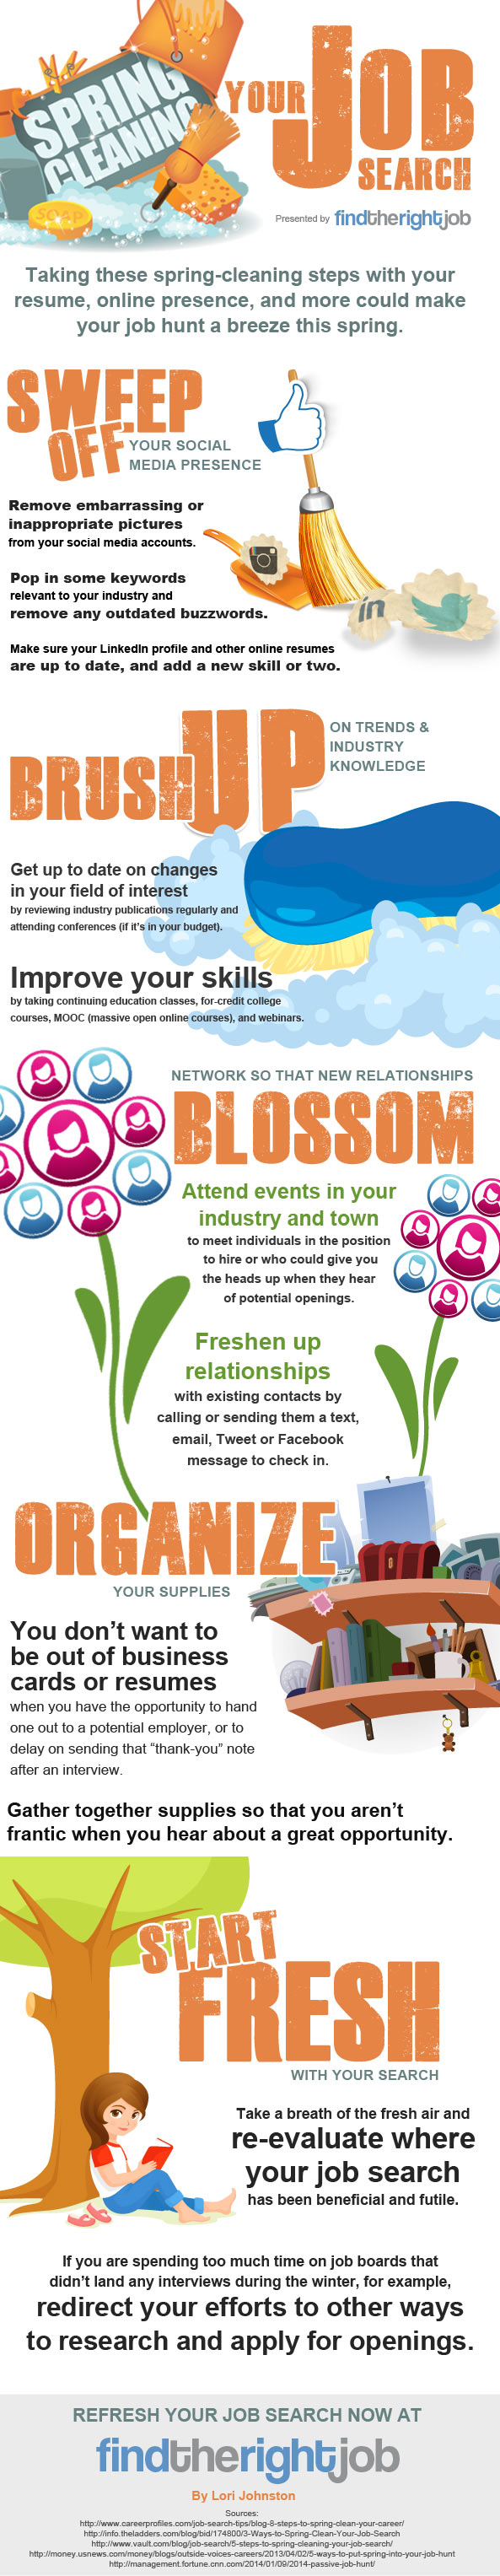 Spring Cleaning Your Job Search [Infographic] - An Infographic from FindTheRightJob